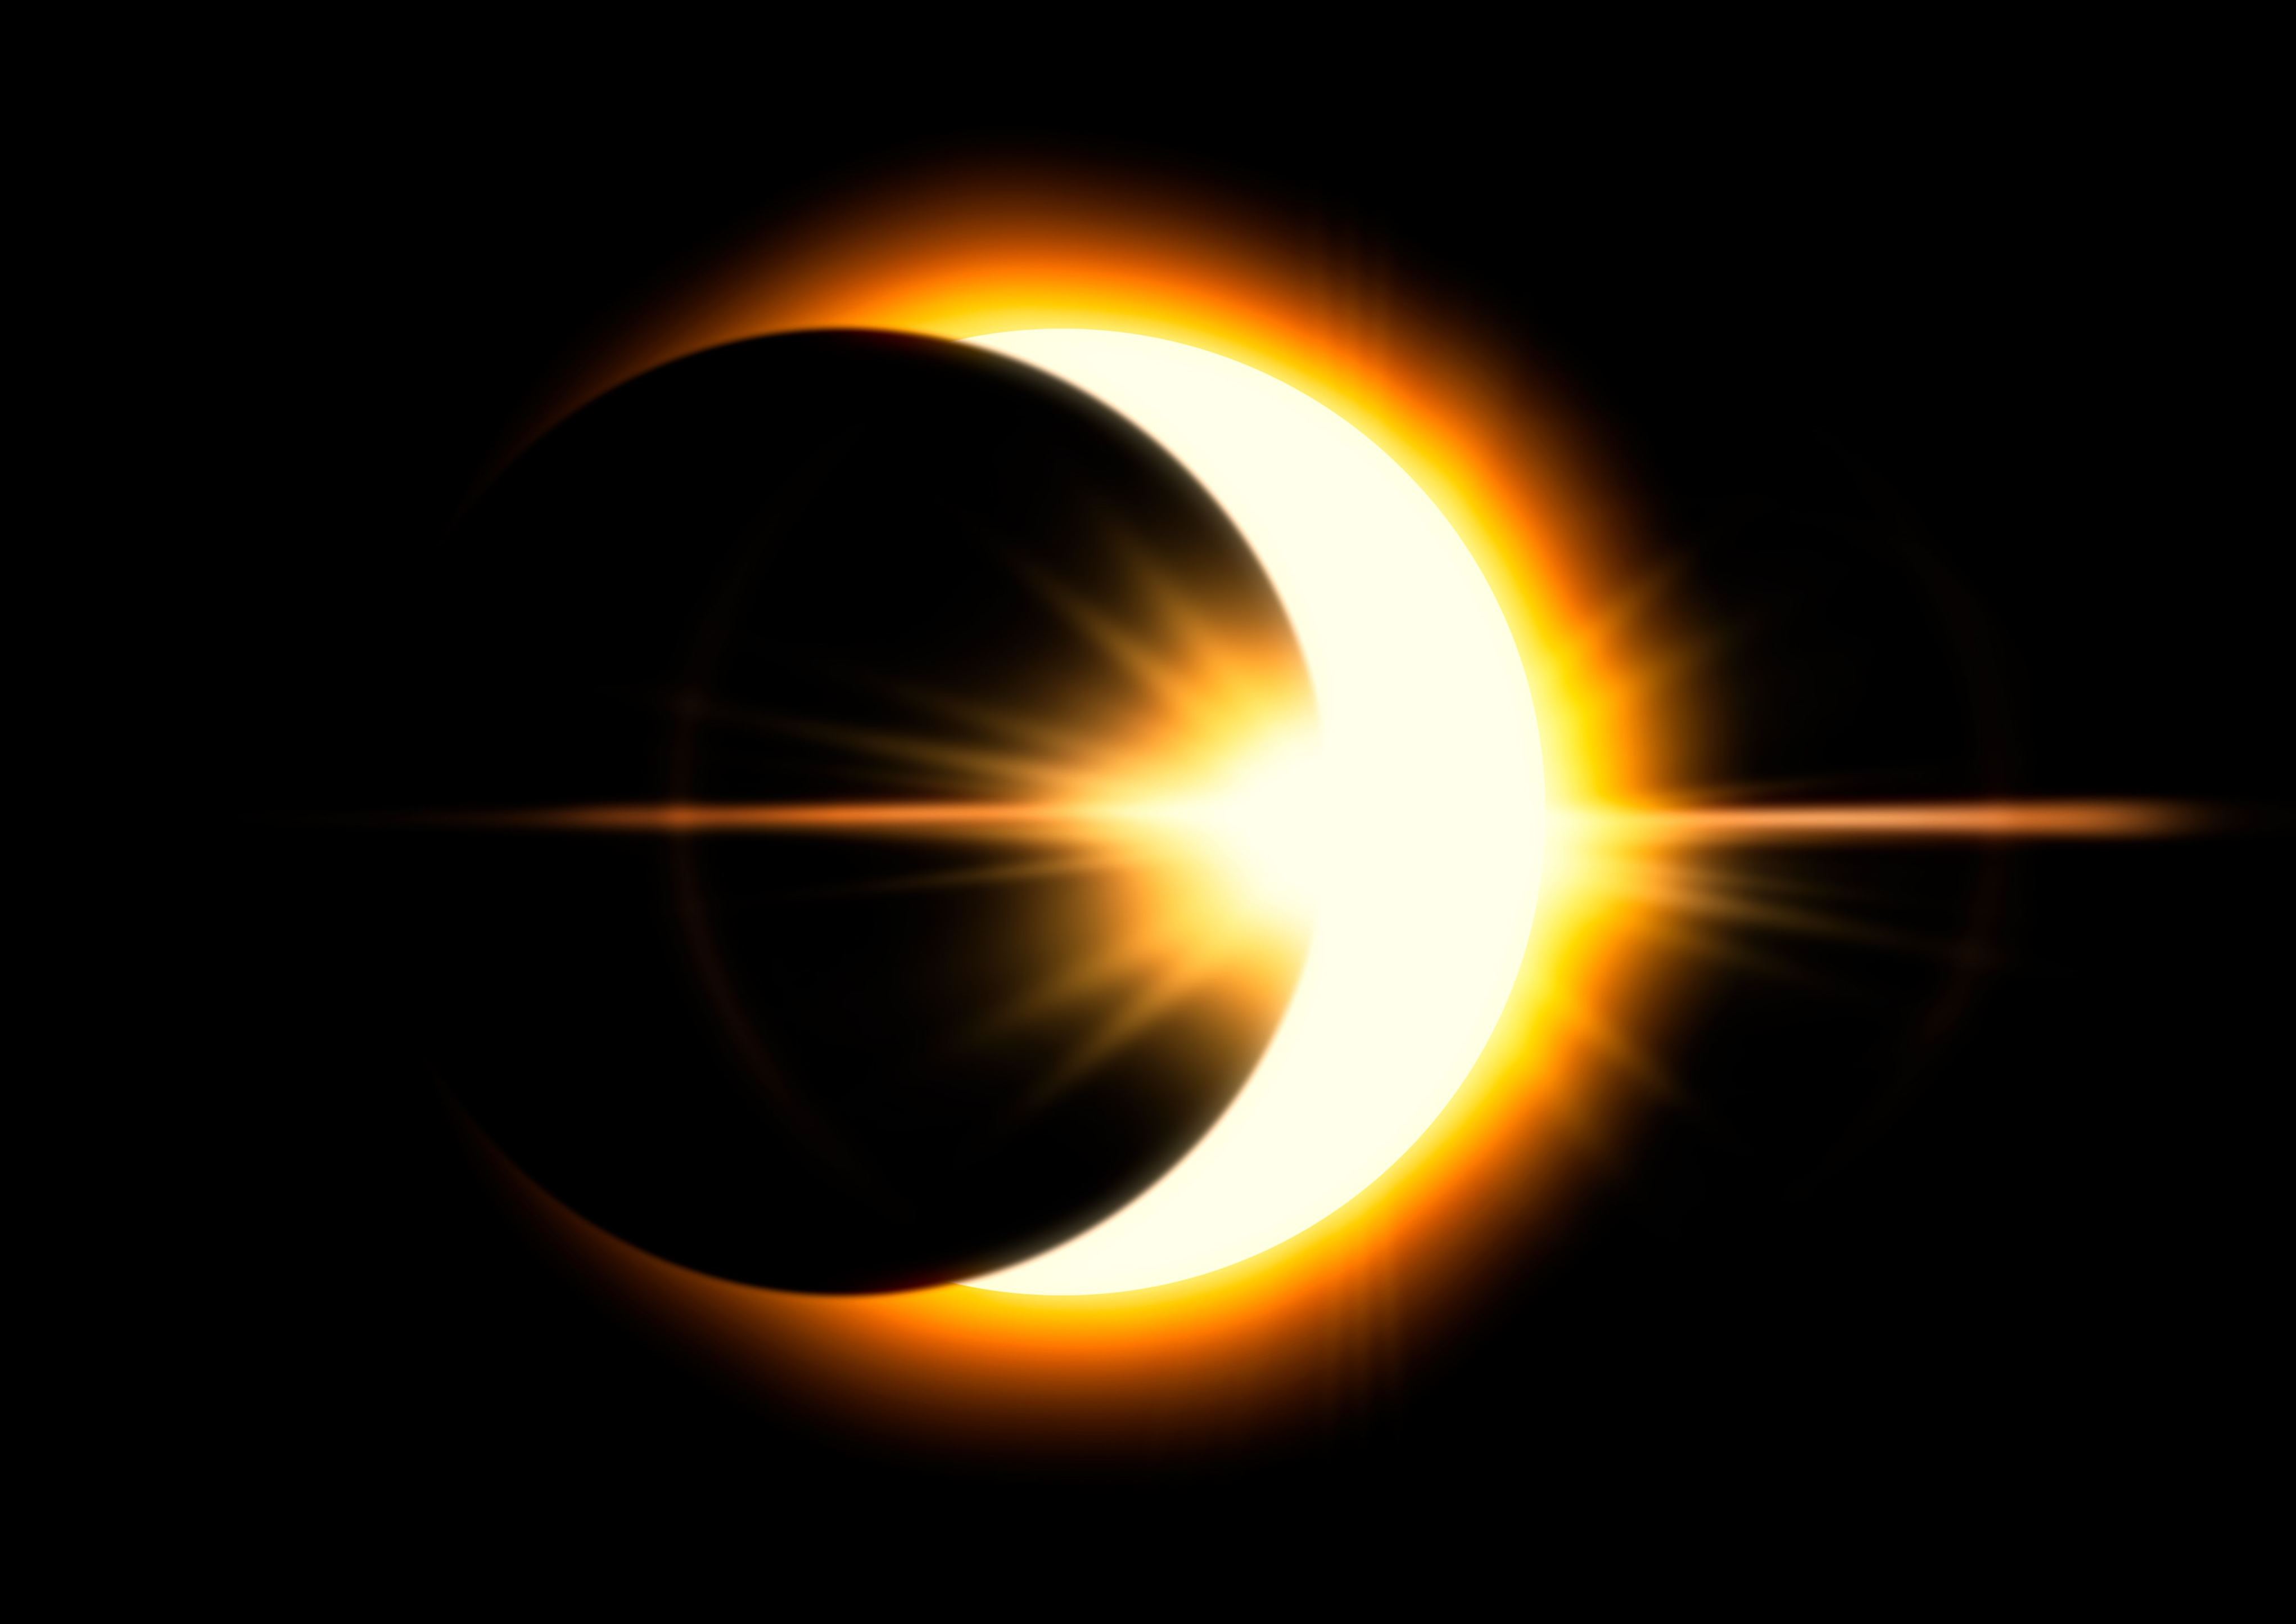 <p class="MsoNormal">A solar eclipse is what you get when the sun, moon and Earth are perfectly aligned, causing the moon to cast its shadow on Earth. They don’t happen all that often, but you know where they <i>never</i> happen? <a href="https://www.factslides.com/s-Solar-System">Anywhere else</a>, that’s where! If you’re not on Earth, you can’t see a solar eclipse, so solar eclipse fans, stay here on Earth. It will be worth it every few years.</p>